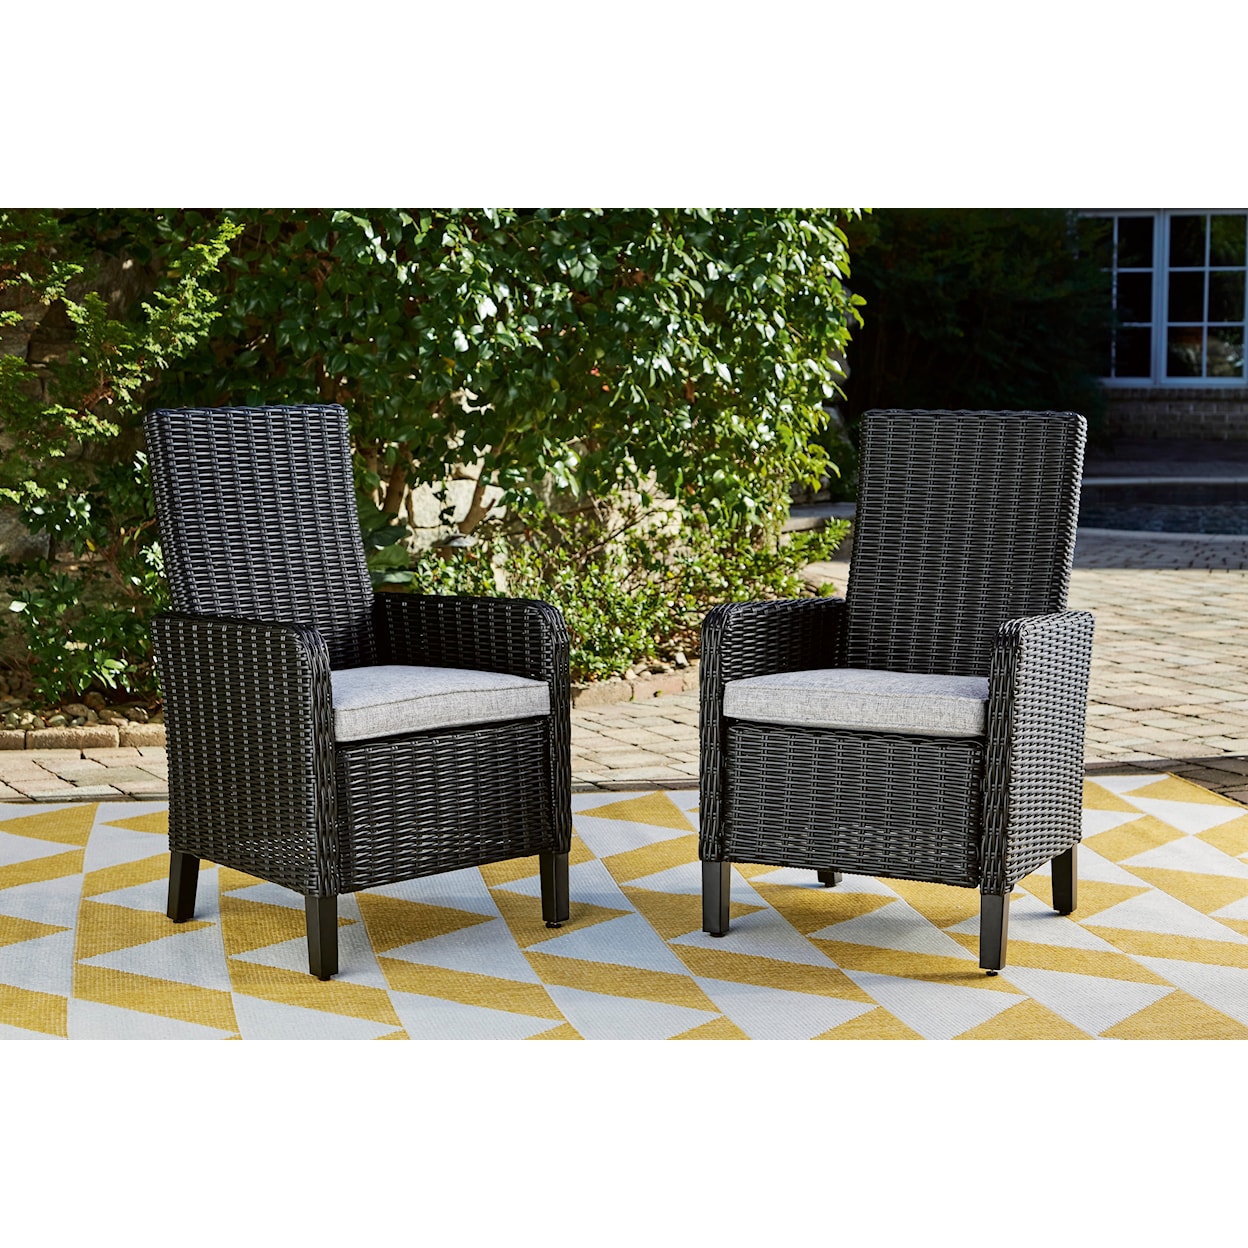 Signature Design by Ashley Beachcroft Set of 2 Arm Chairs with Cushion